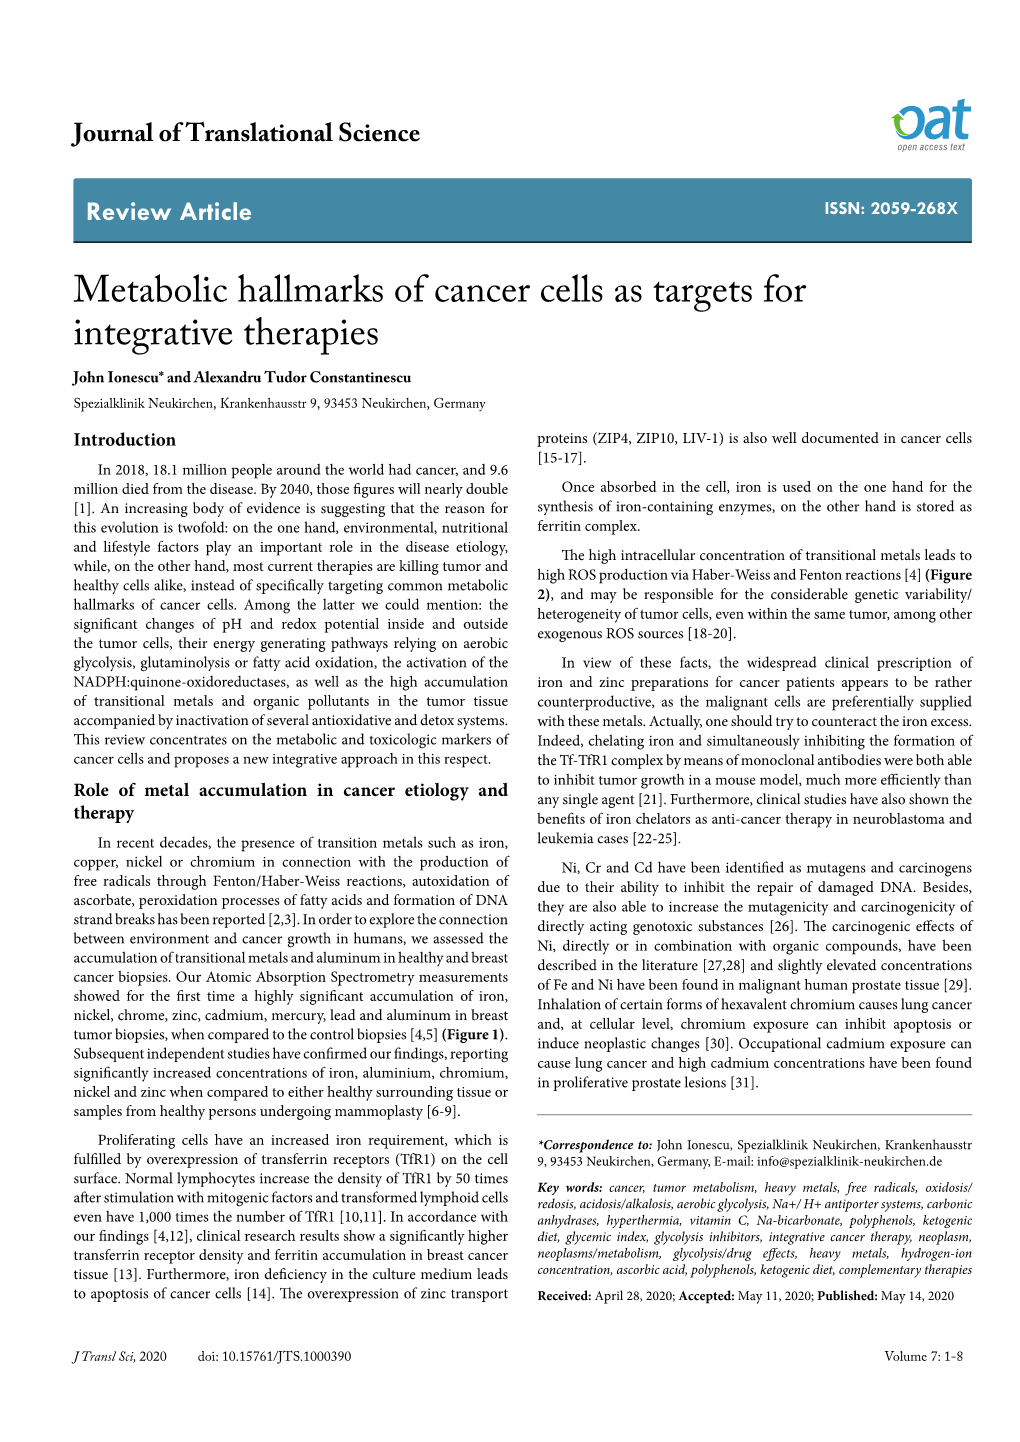 Metabolic Hallmarks of Cancer Cells As Targets for Integrative Therapies